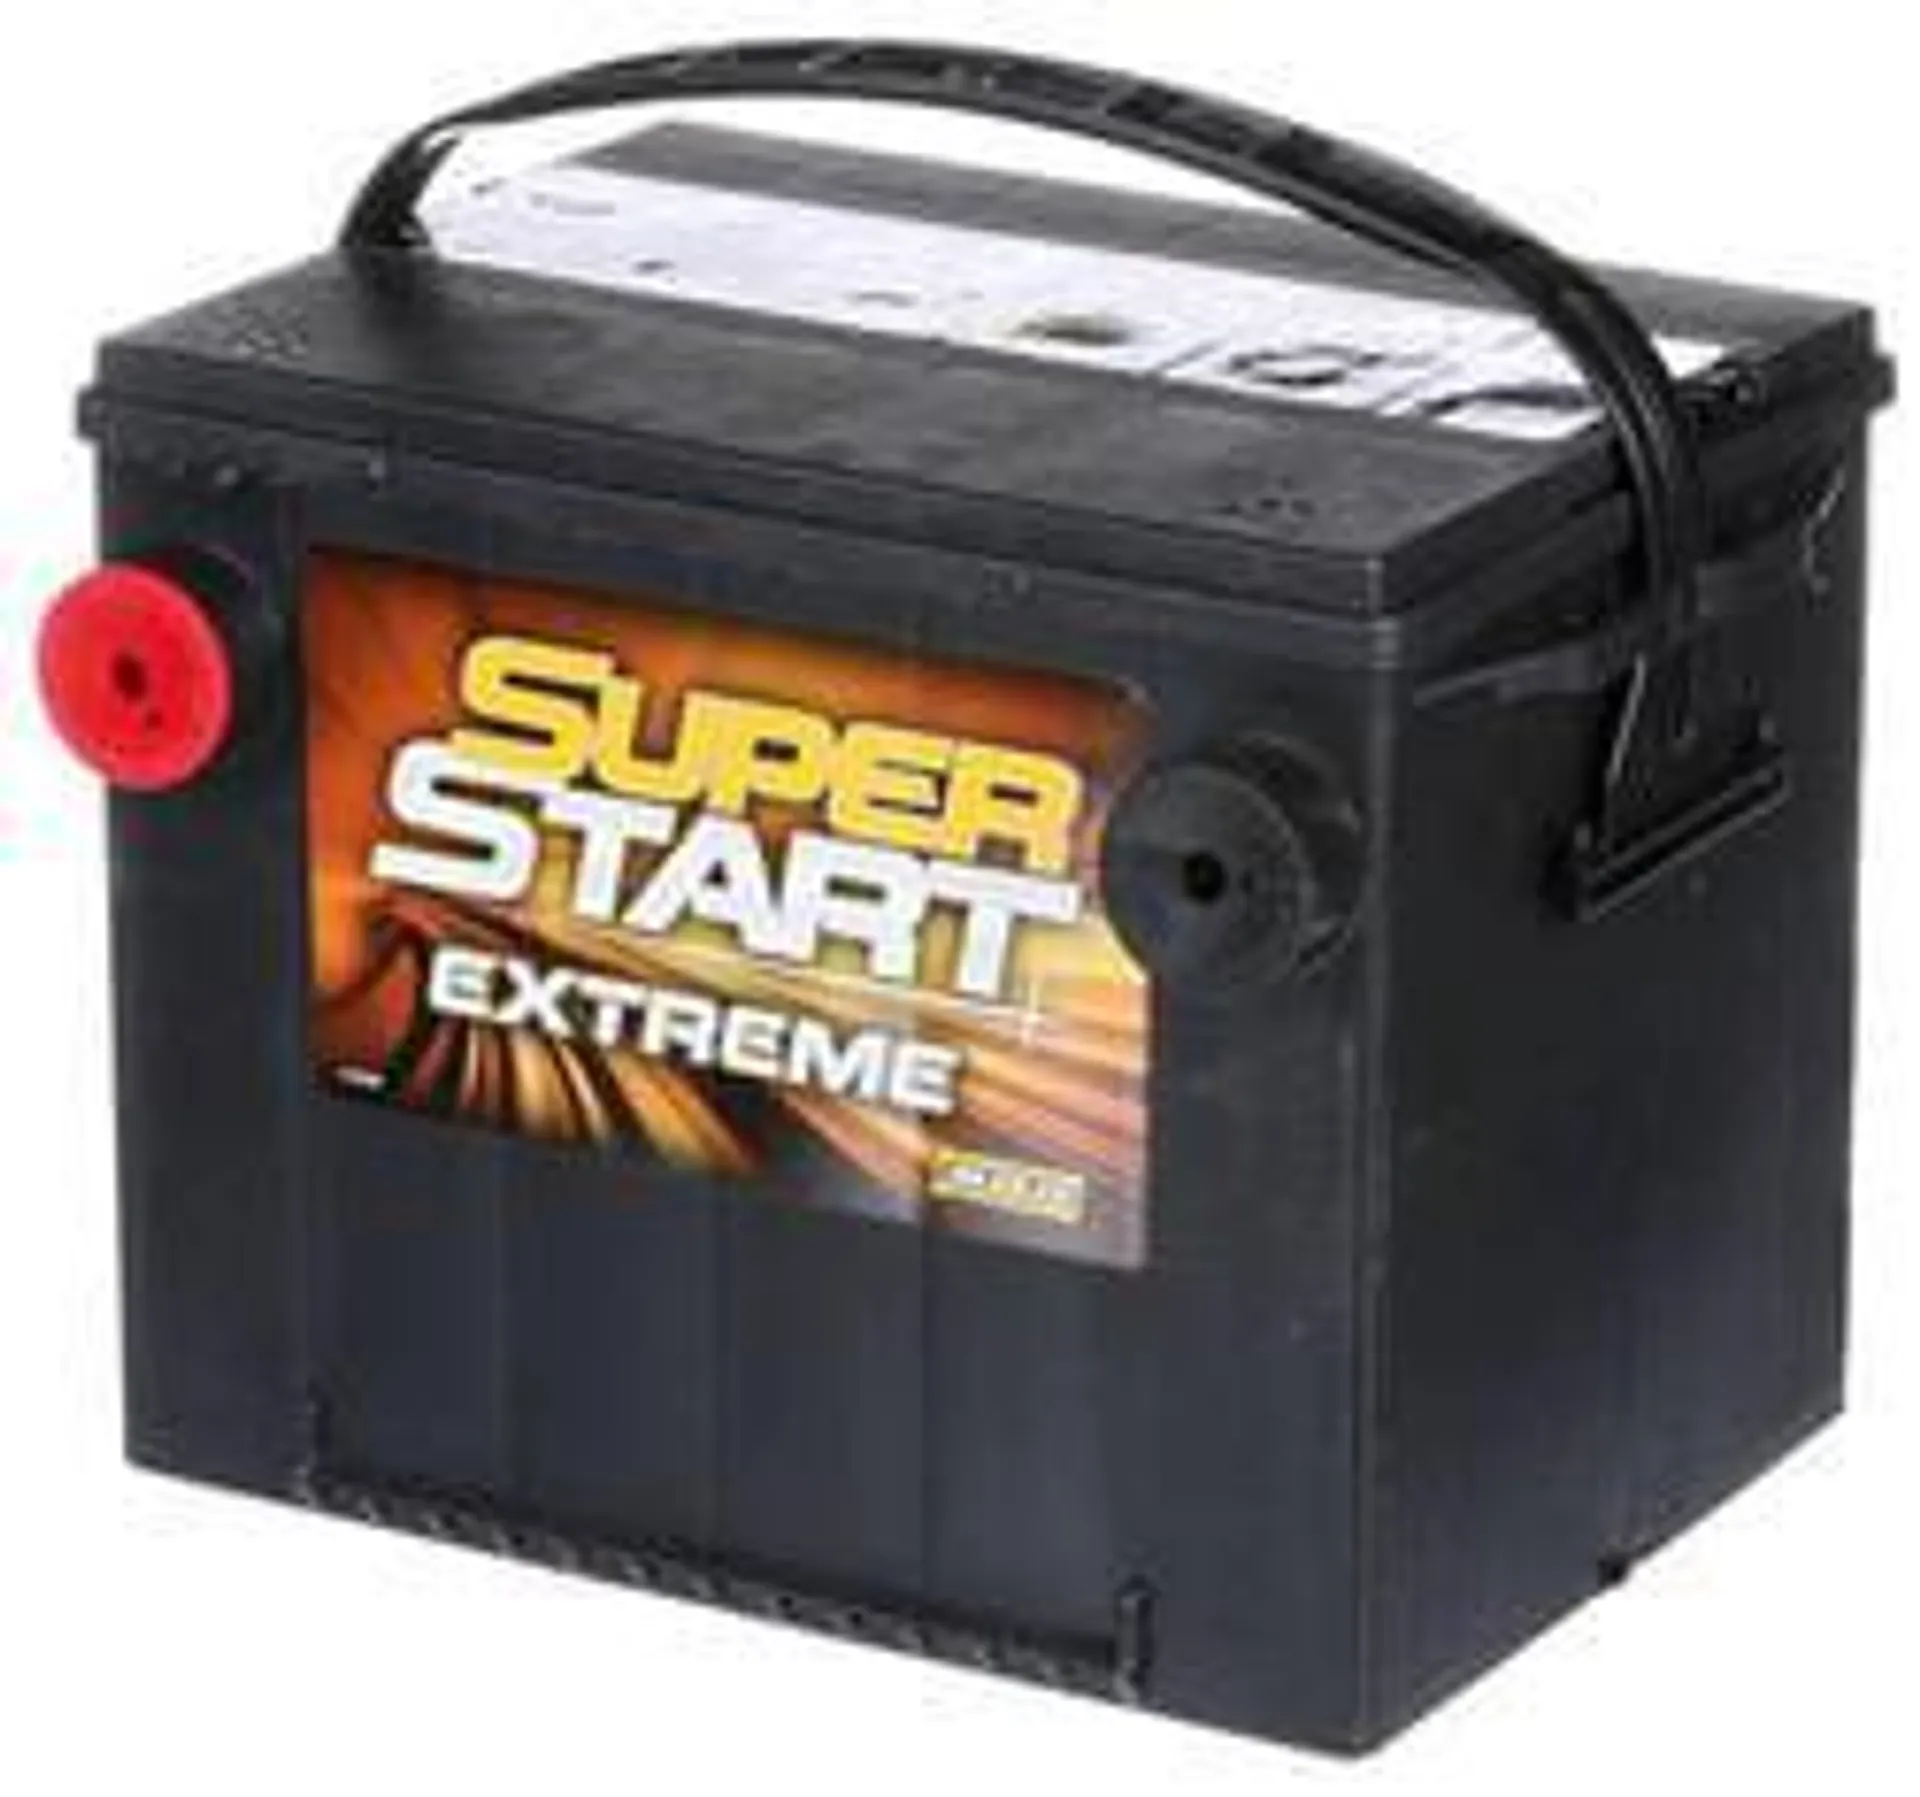 Super Start Extreme Battery Group Size 75 - 75EXT